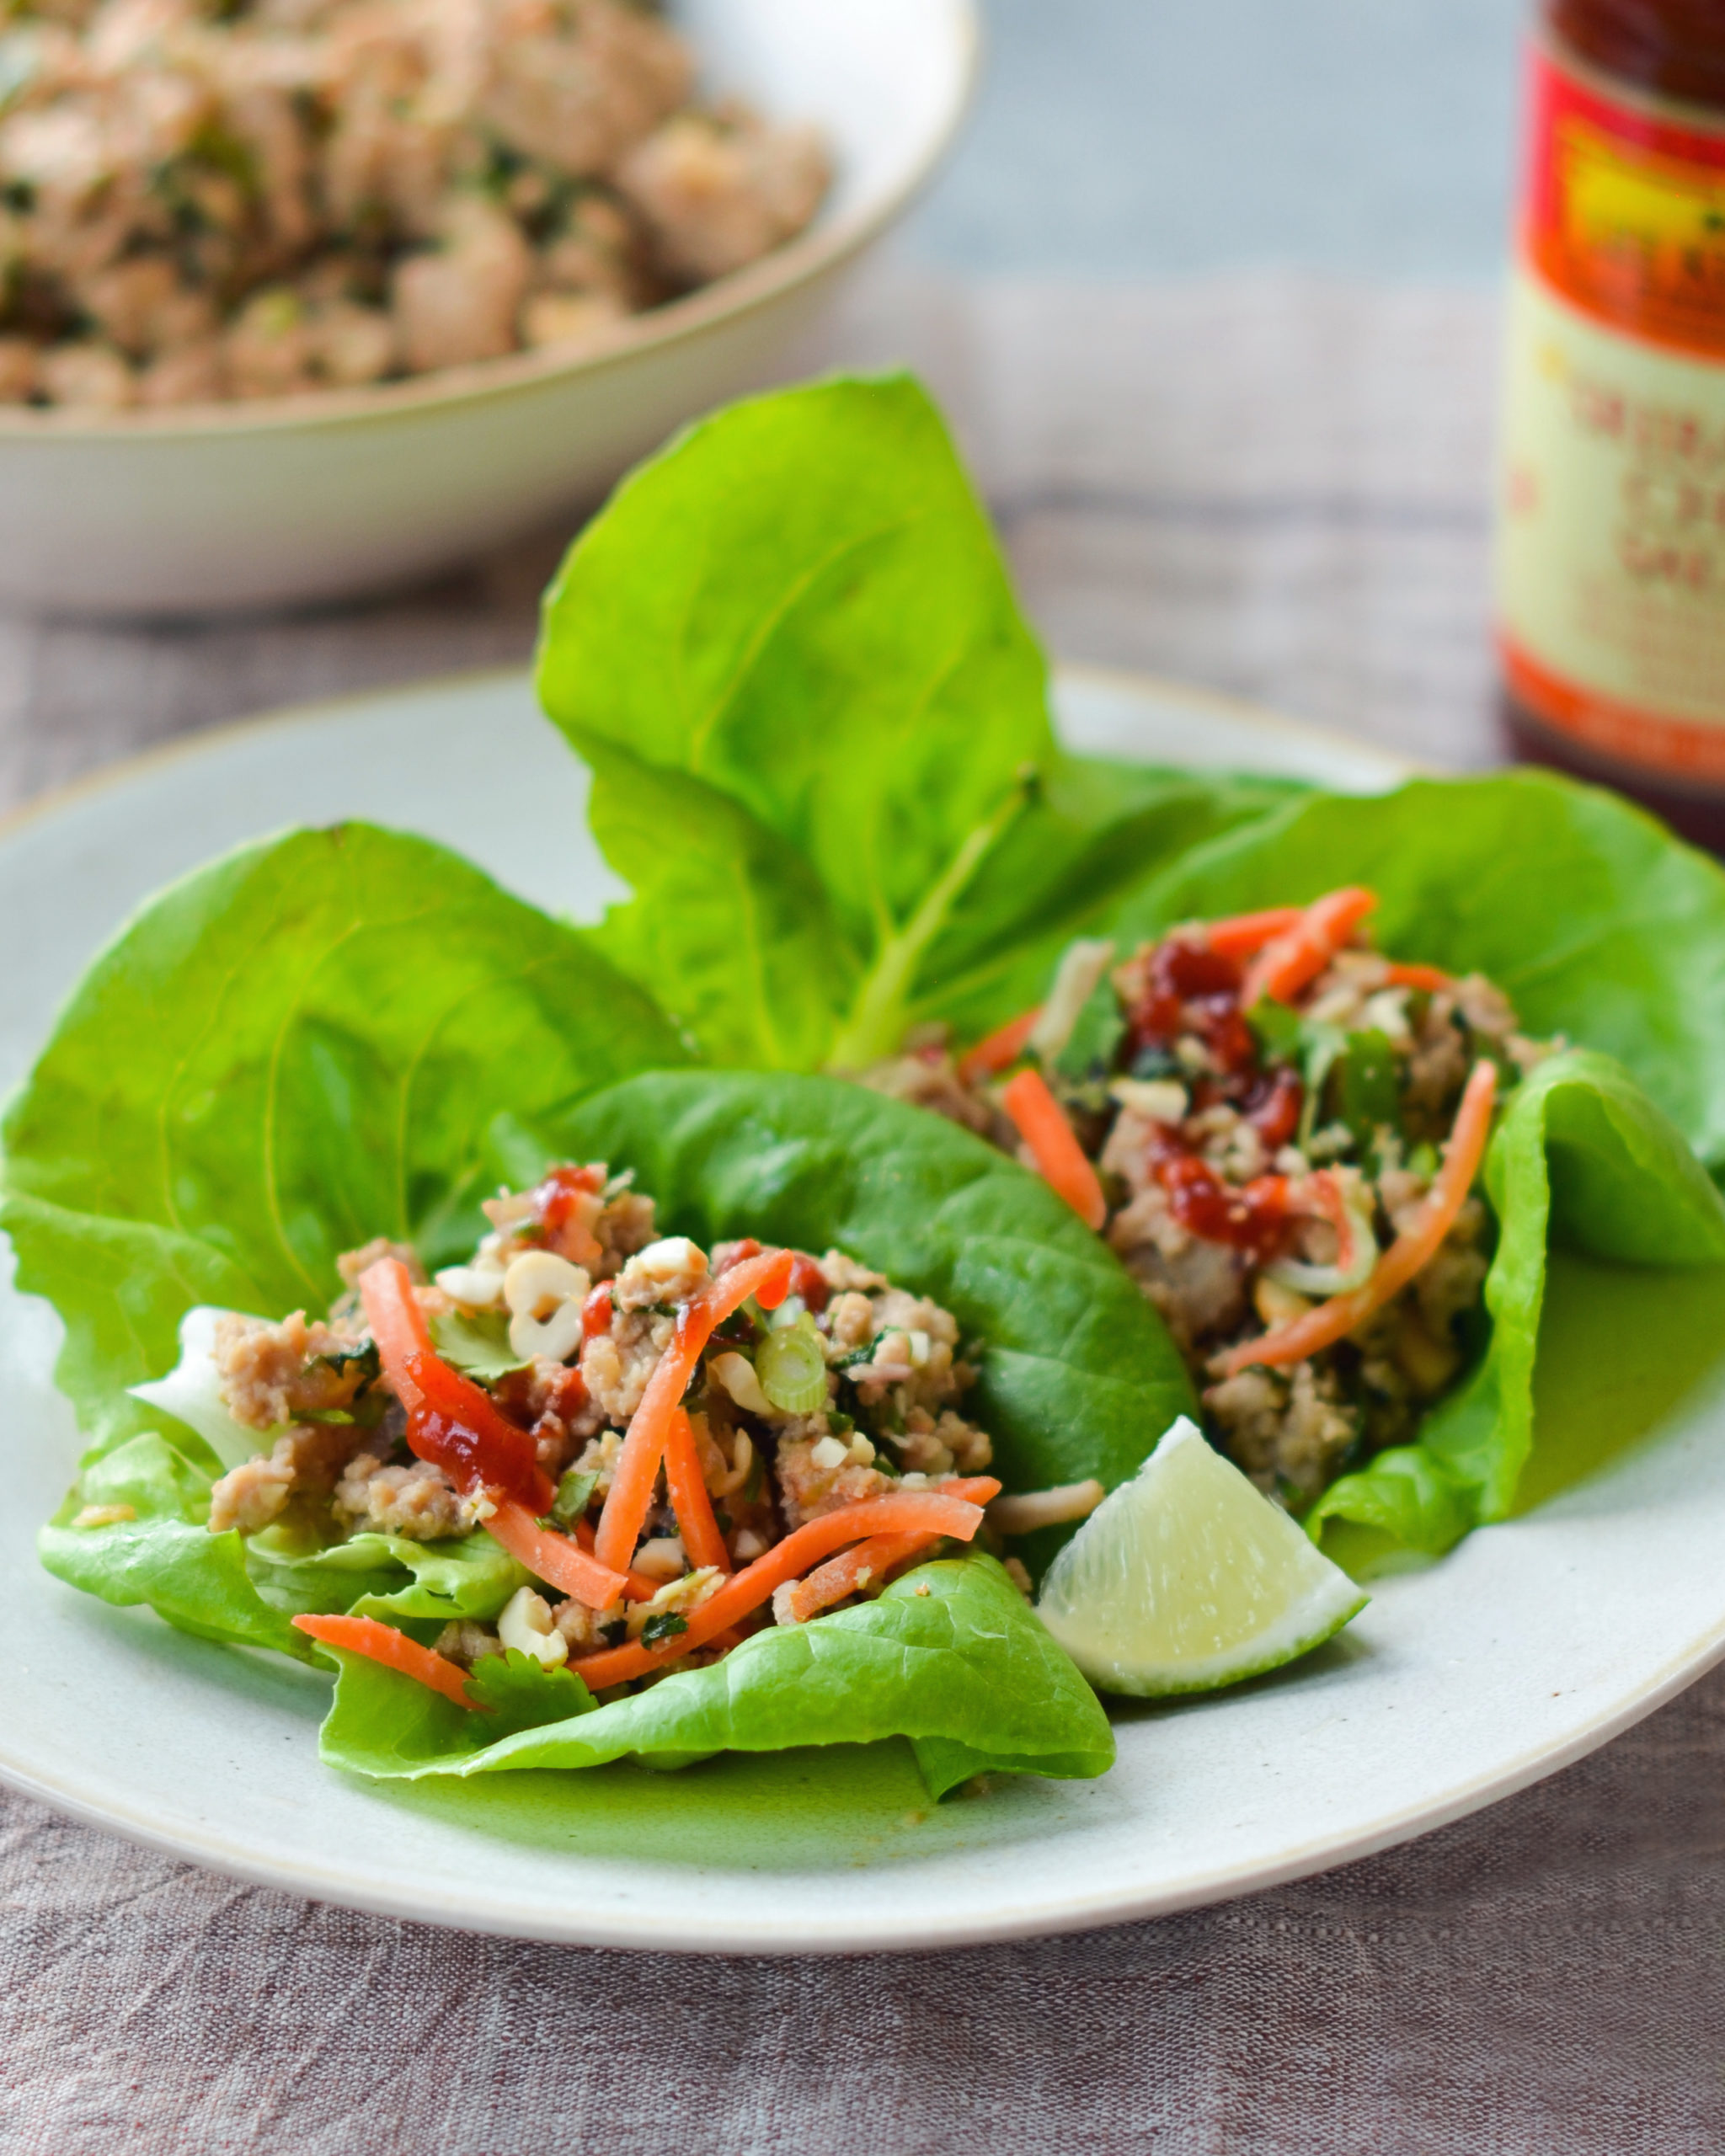 https://www.onceuponachef.com/images/2014/07/Thai-Style-Minced-Chicken-Lettuce-Cups-scaled.jpg